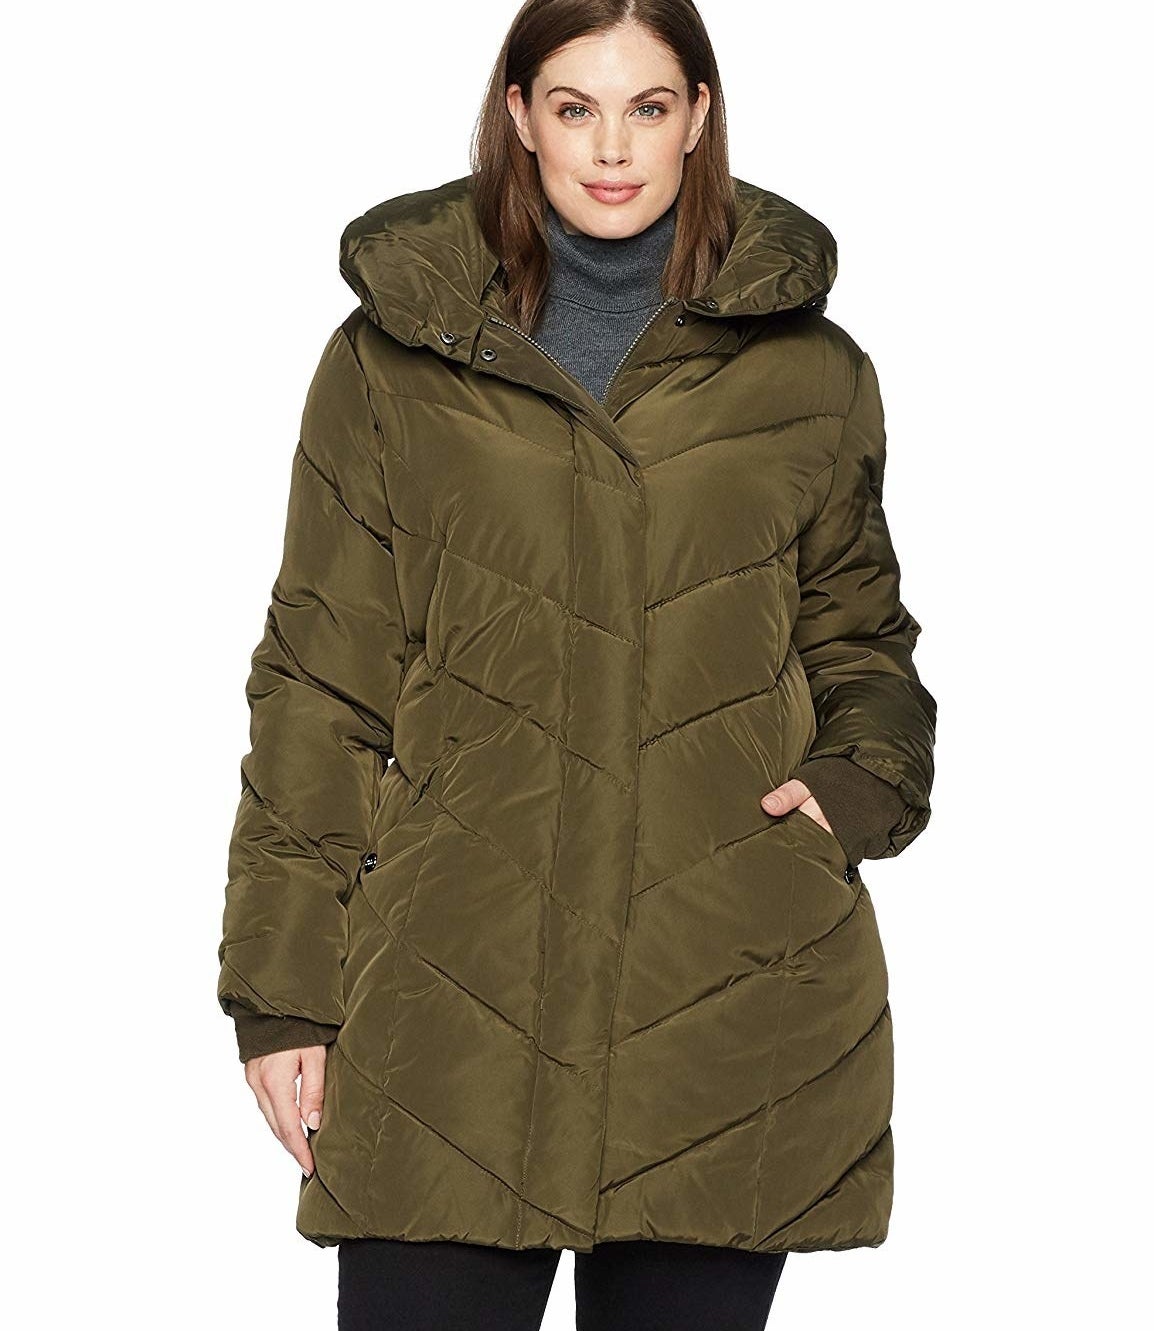 17 Of The Best Women's Winter Coats You Can Get On Amazon